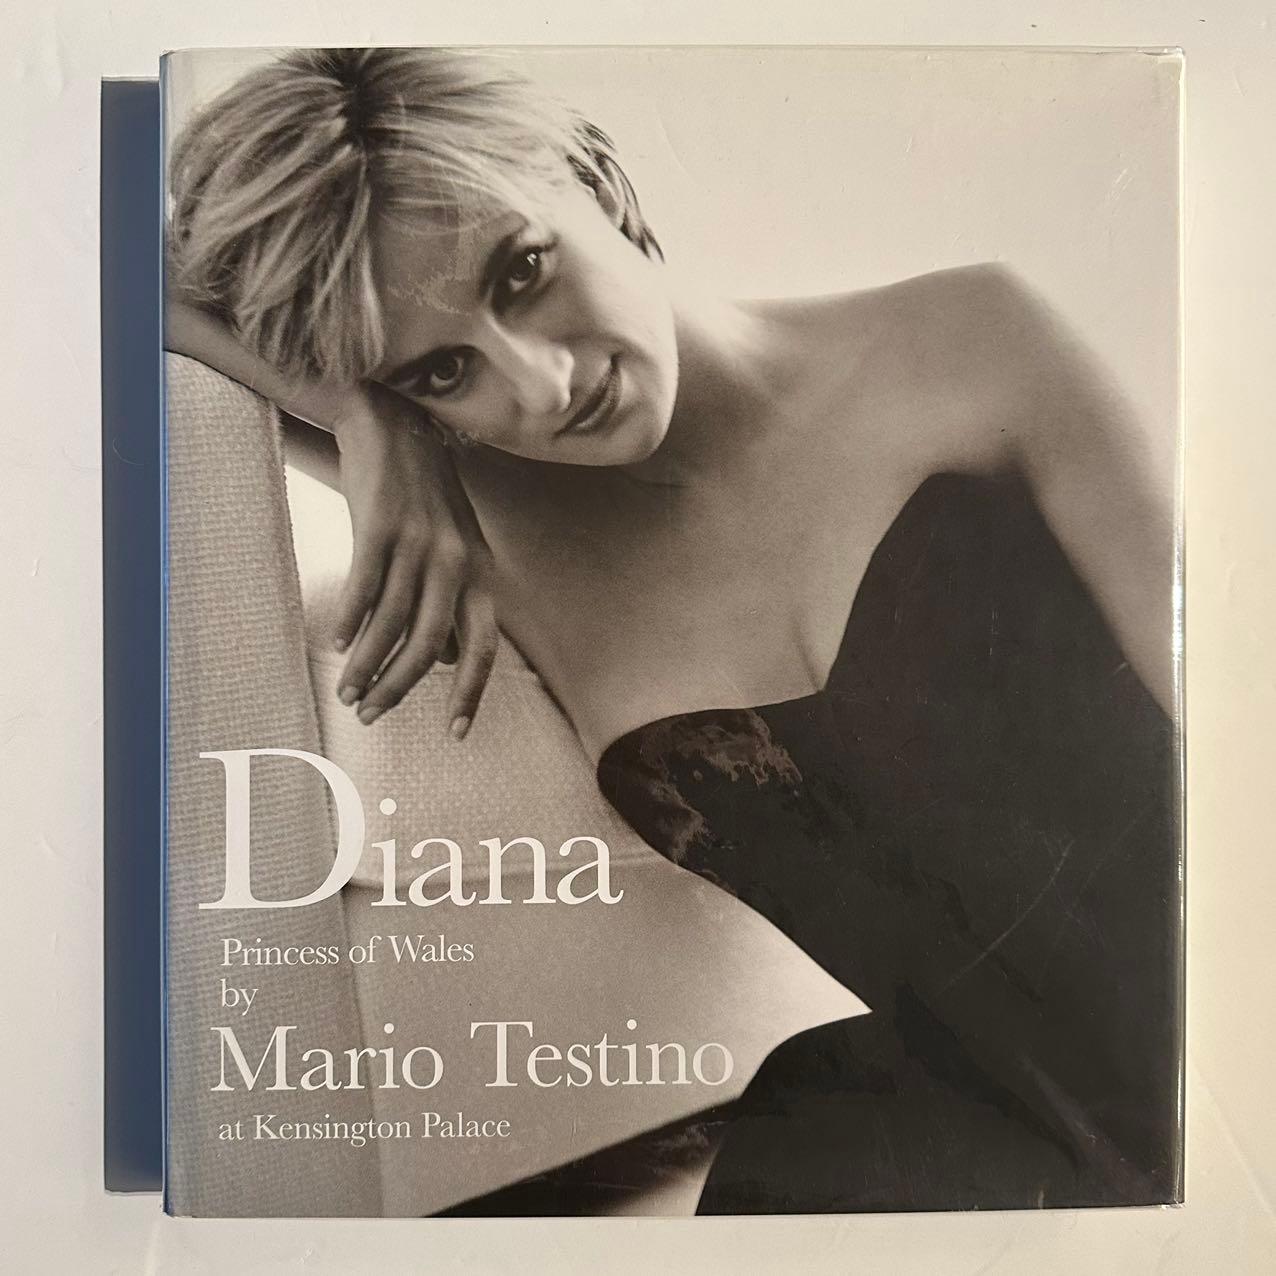 Published by Taschen, accompanying the exhibition Diana Princess of Wales by Mario Testino at Kensington Palace in London, 24 November 2005 - 1 July 2007. 2005 Hardback English text with corresponding French and German translations.

This book